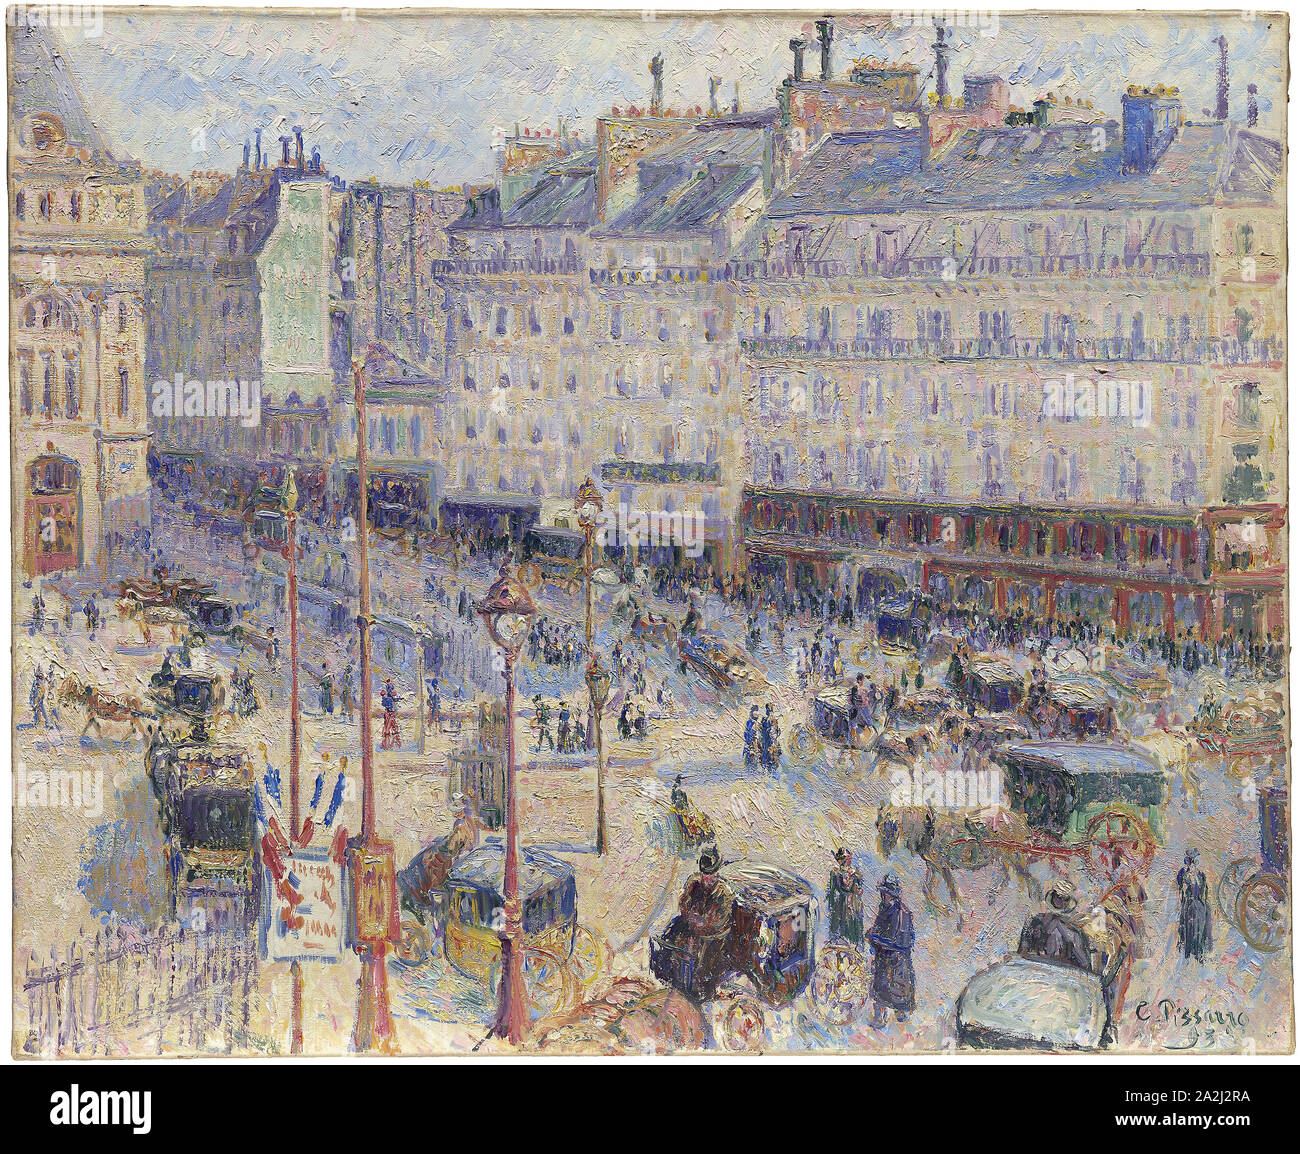 The Place du Havre, Paris, 1893, Camille Pissarro, French, 1830-1903, France, Oil on canvas, 60.1 × 73.5 cm (23 5/8 × 28 13/16 in Stock Photo